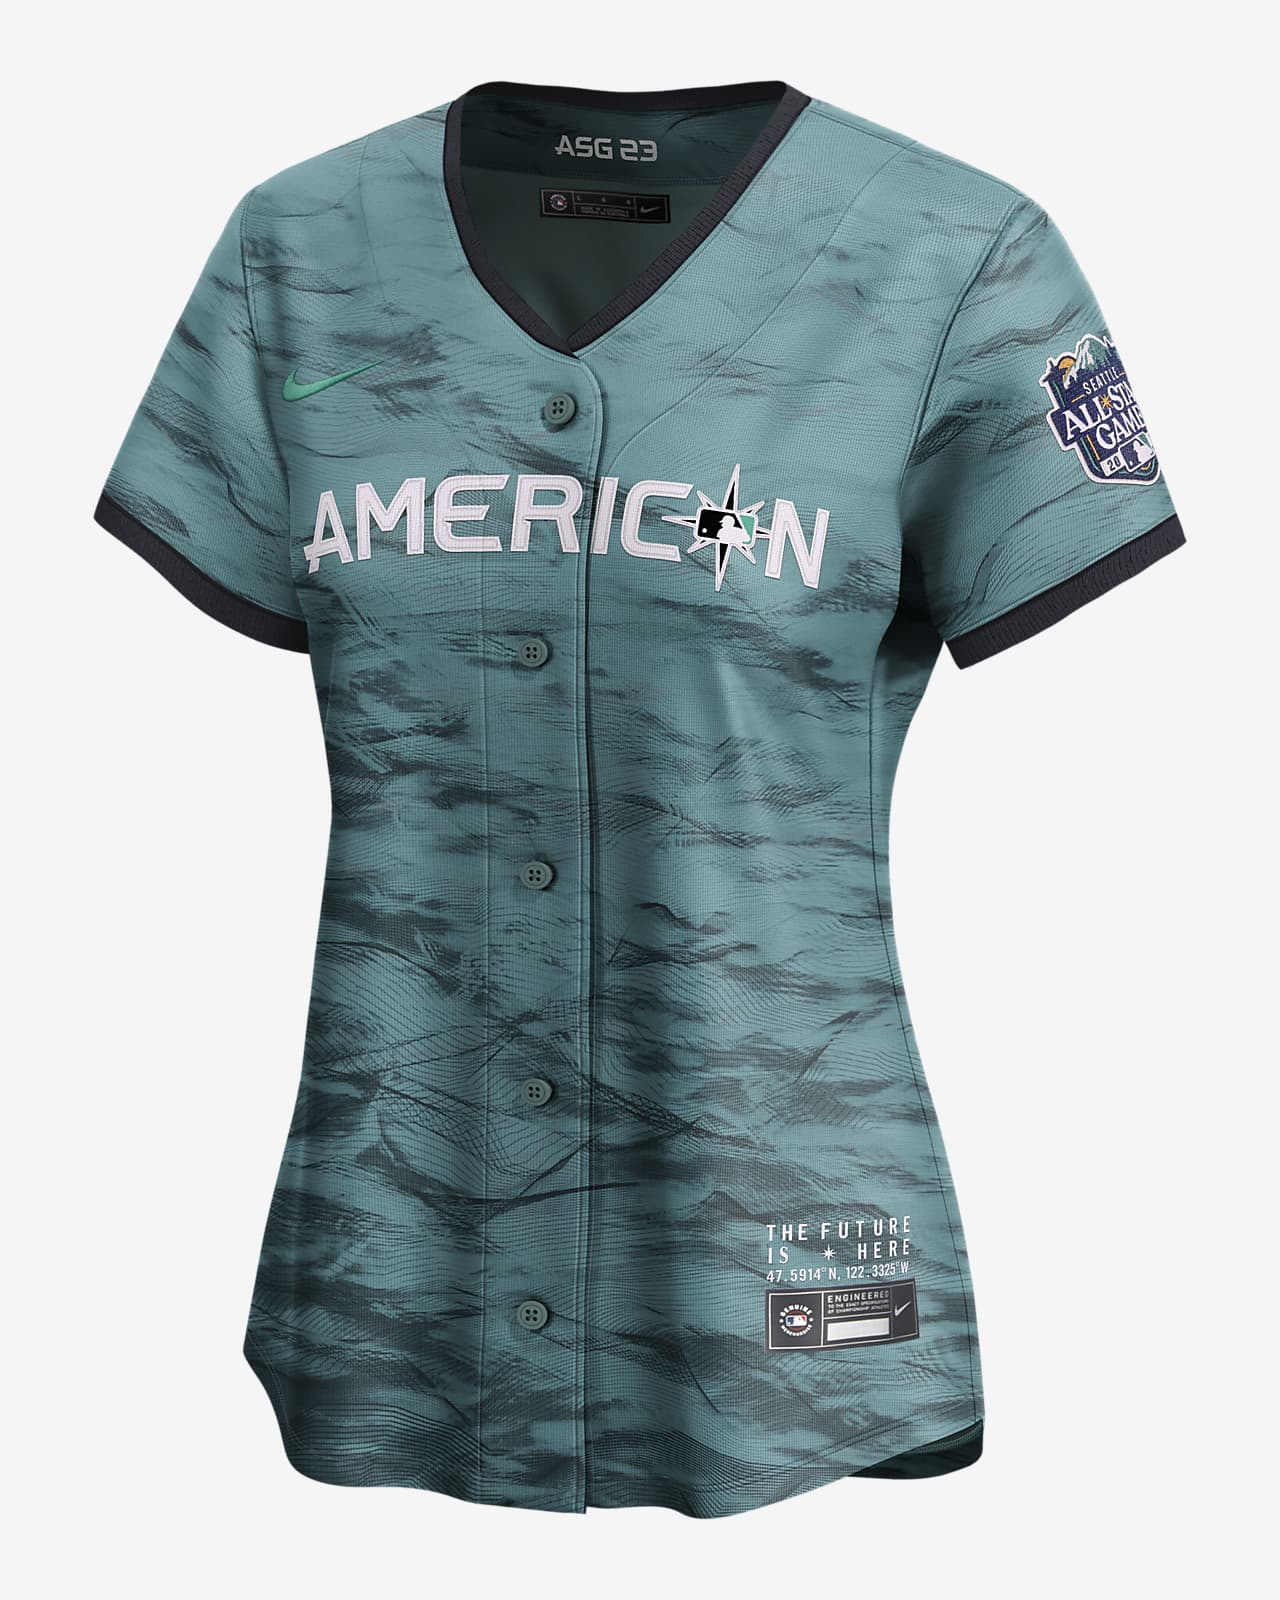 Official MLB MLB All Star Game Merchandise, Baseball Collection